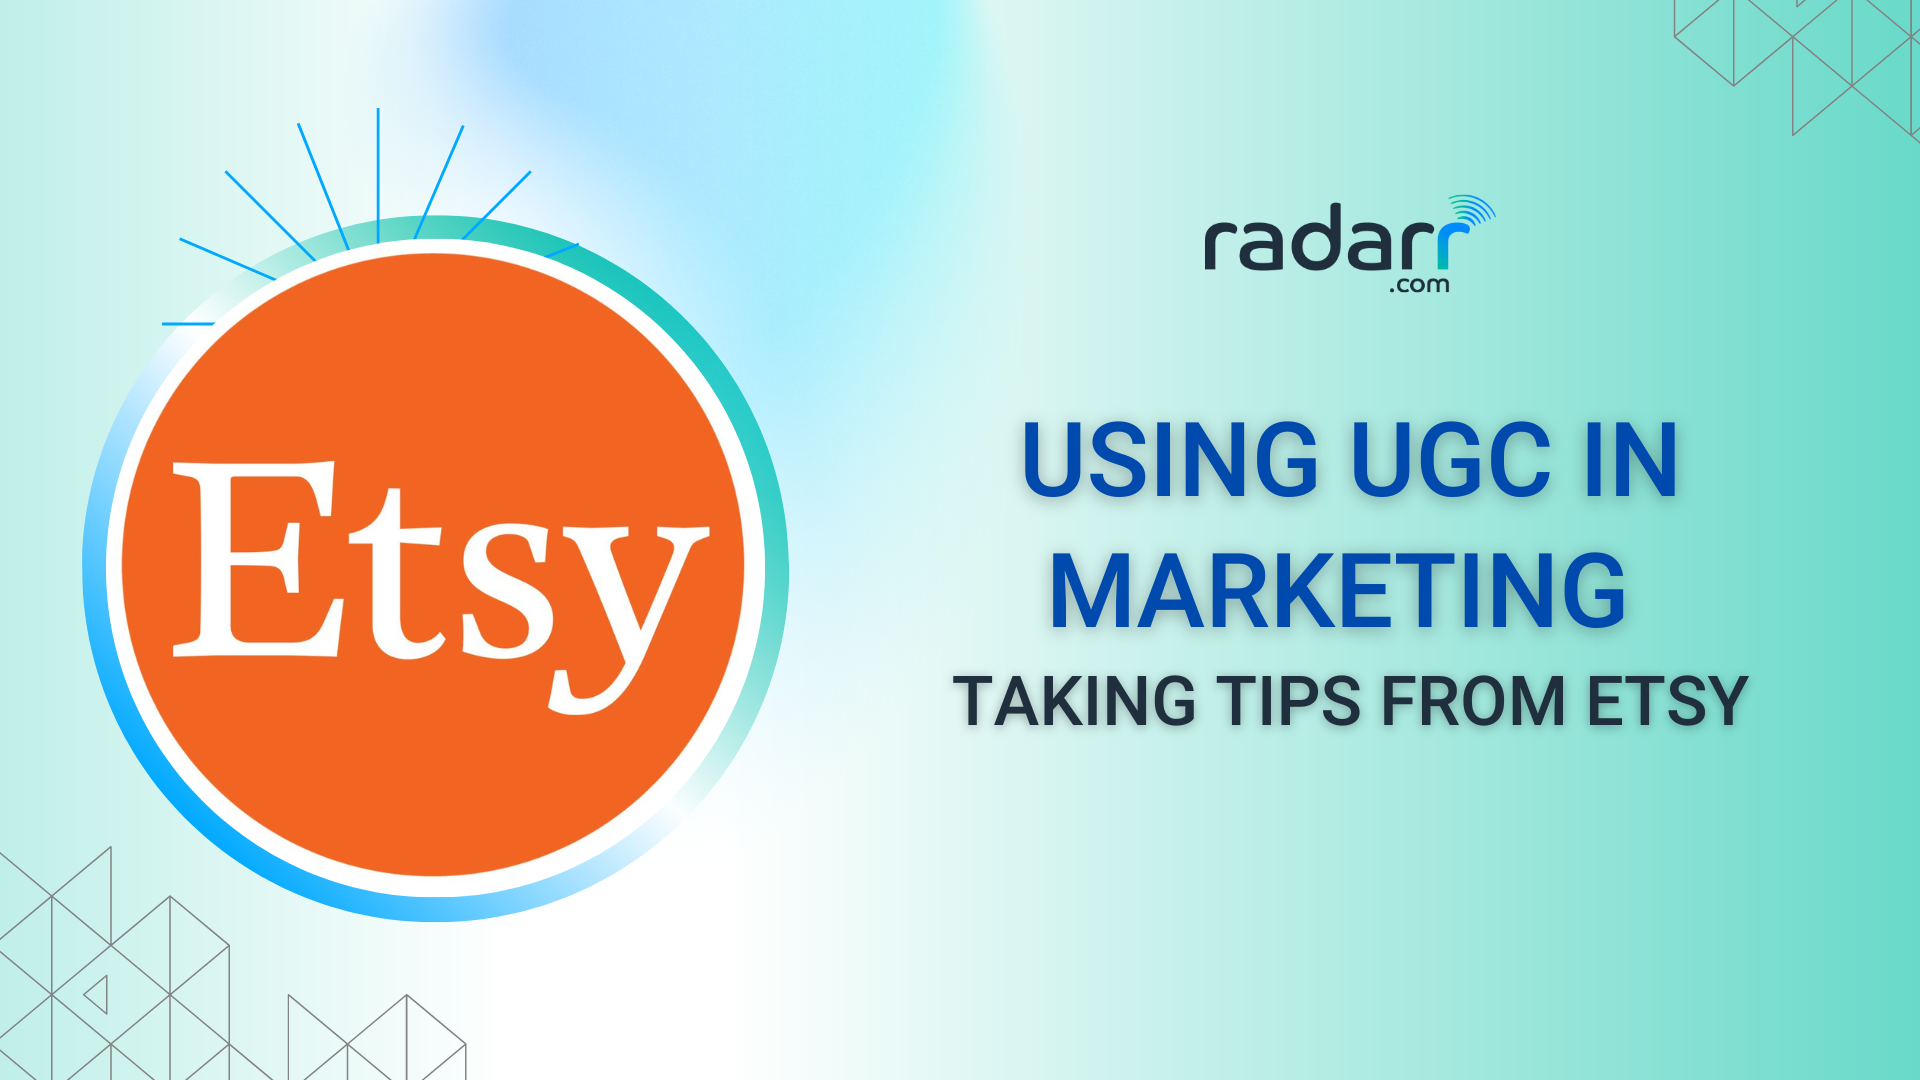 ugc in marketing - examples from etsy